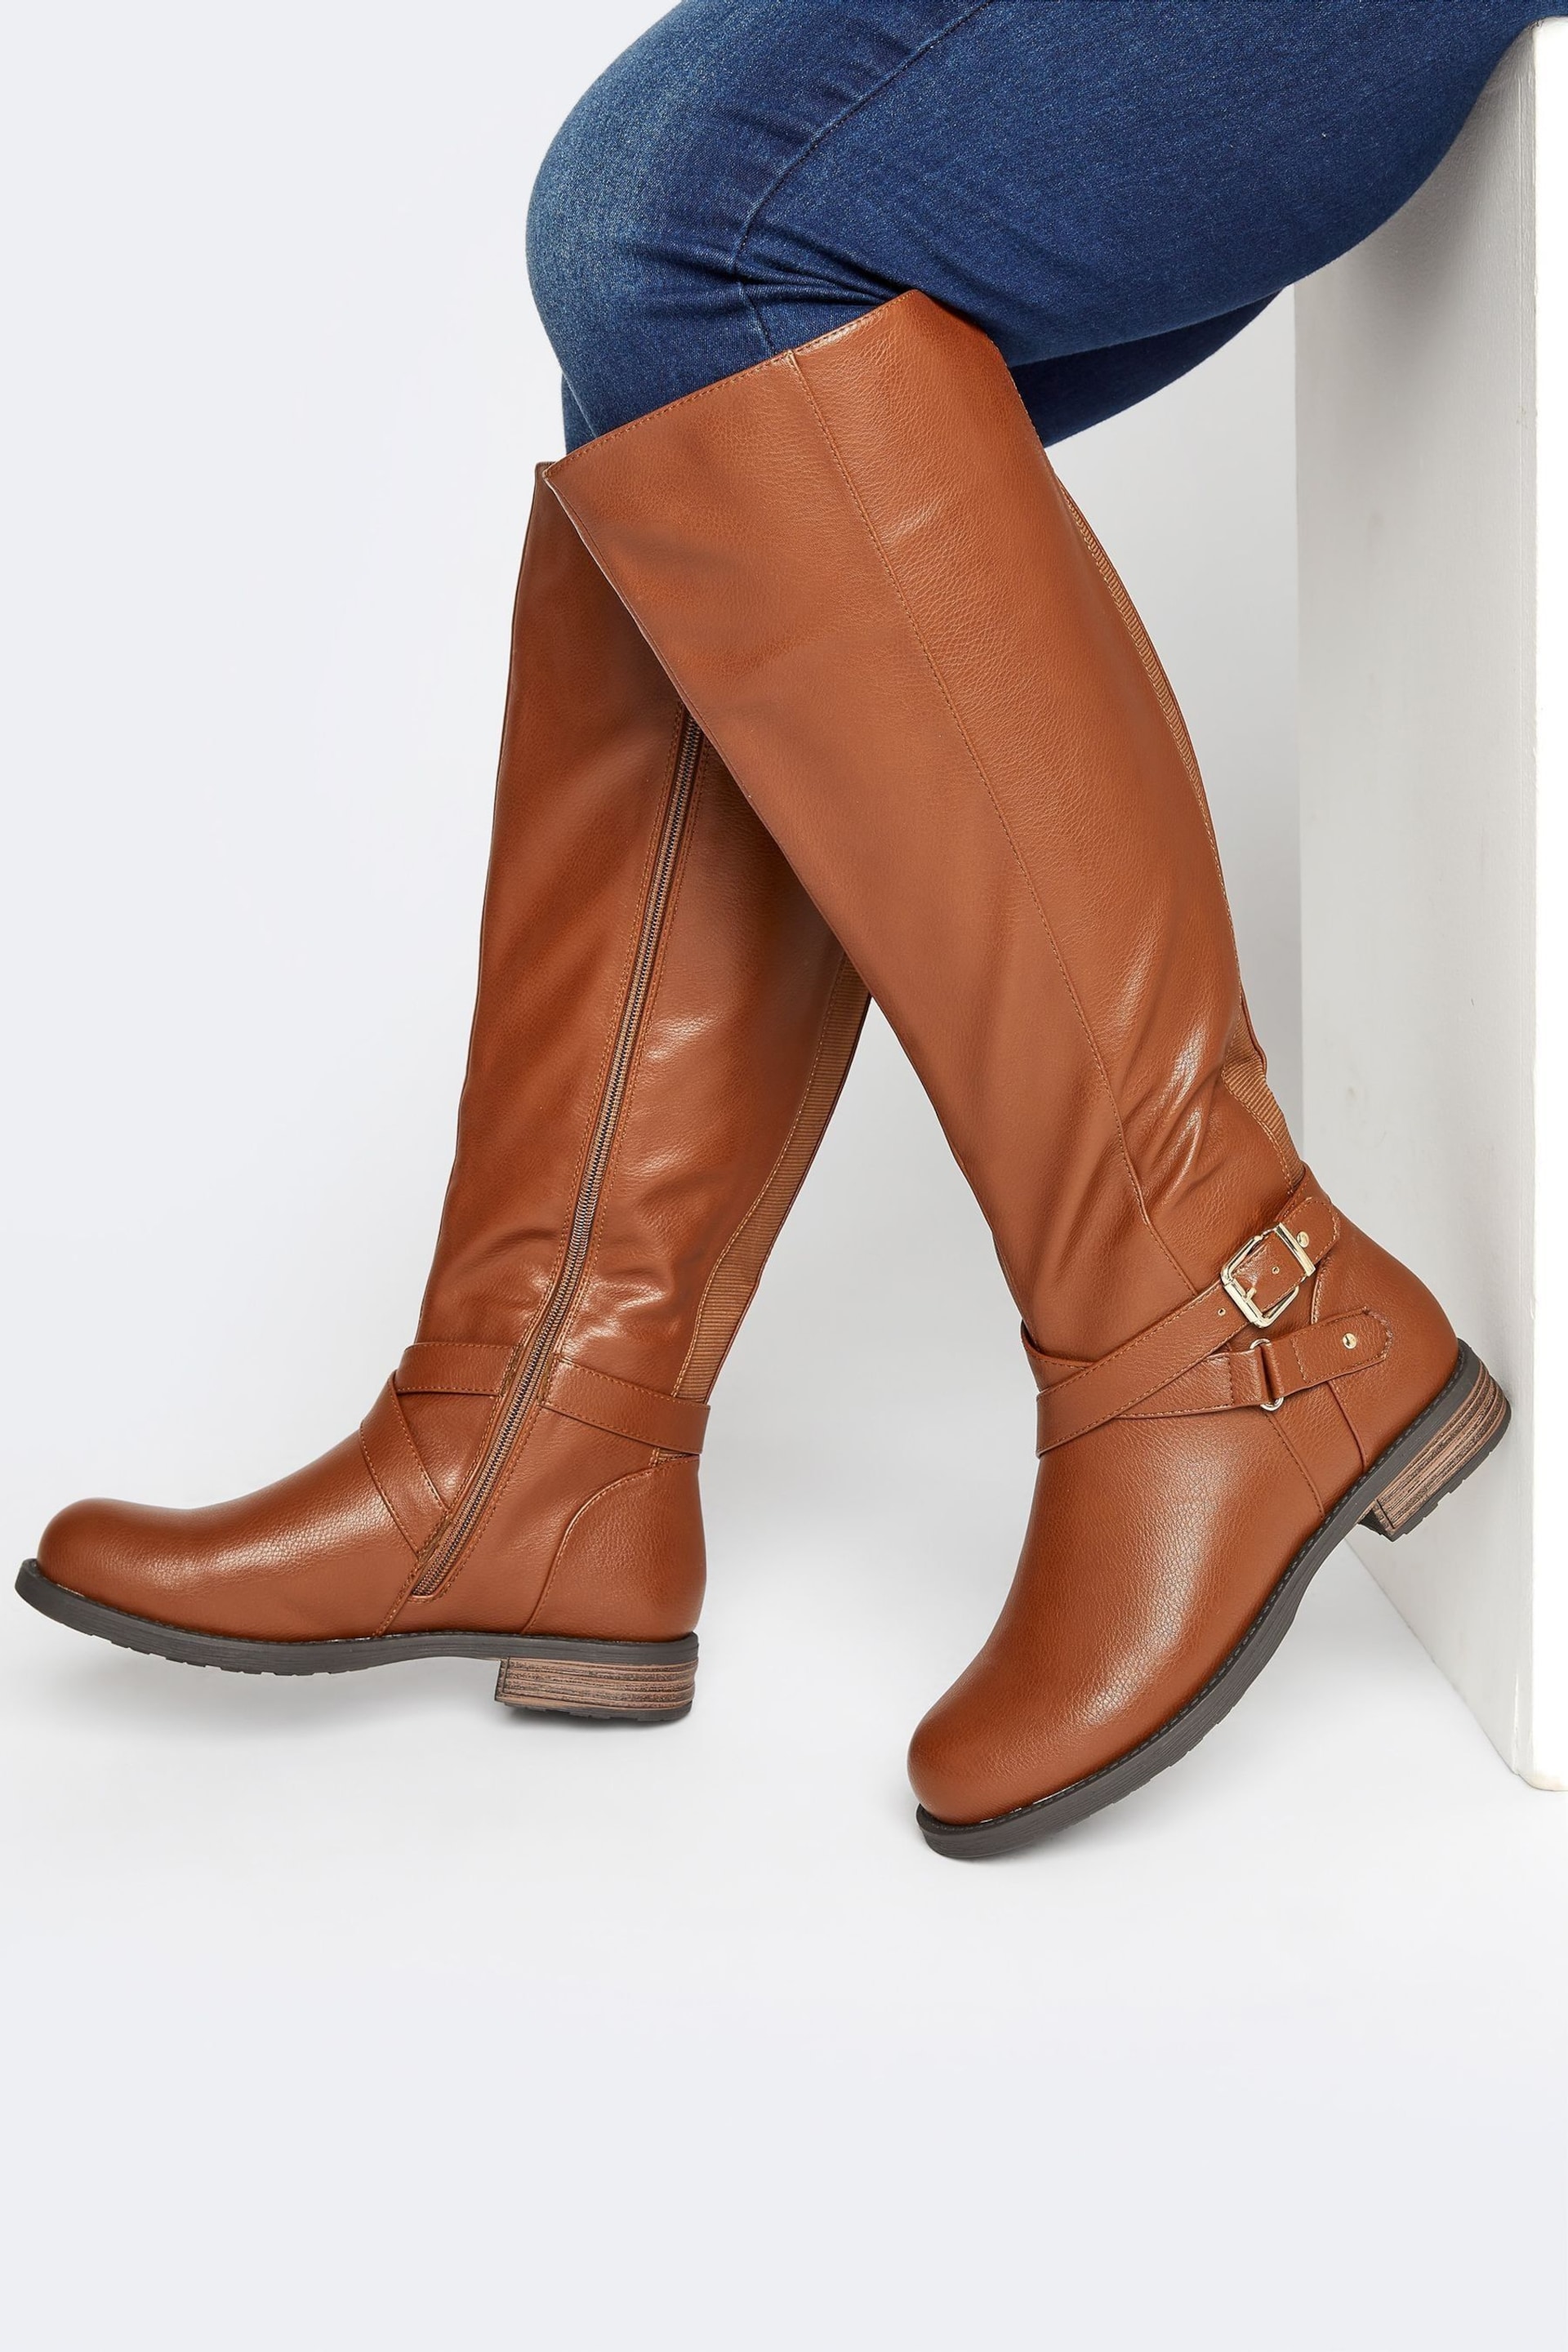 Long Tall Sally Brown Leather Riding Boots - Image 1 of 5